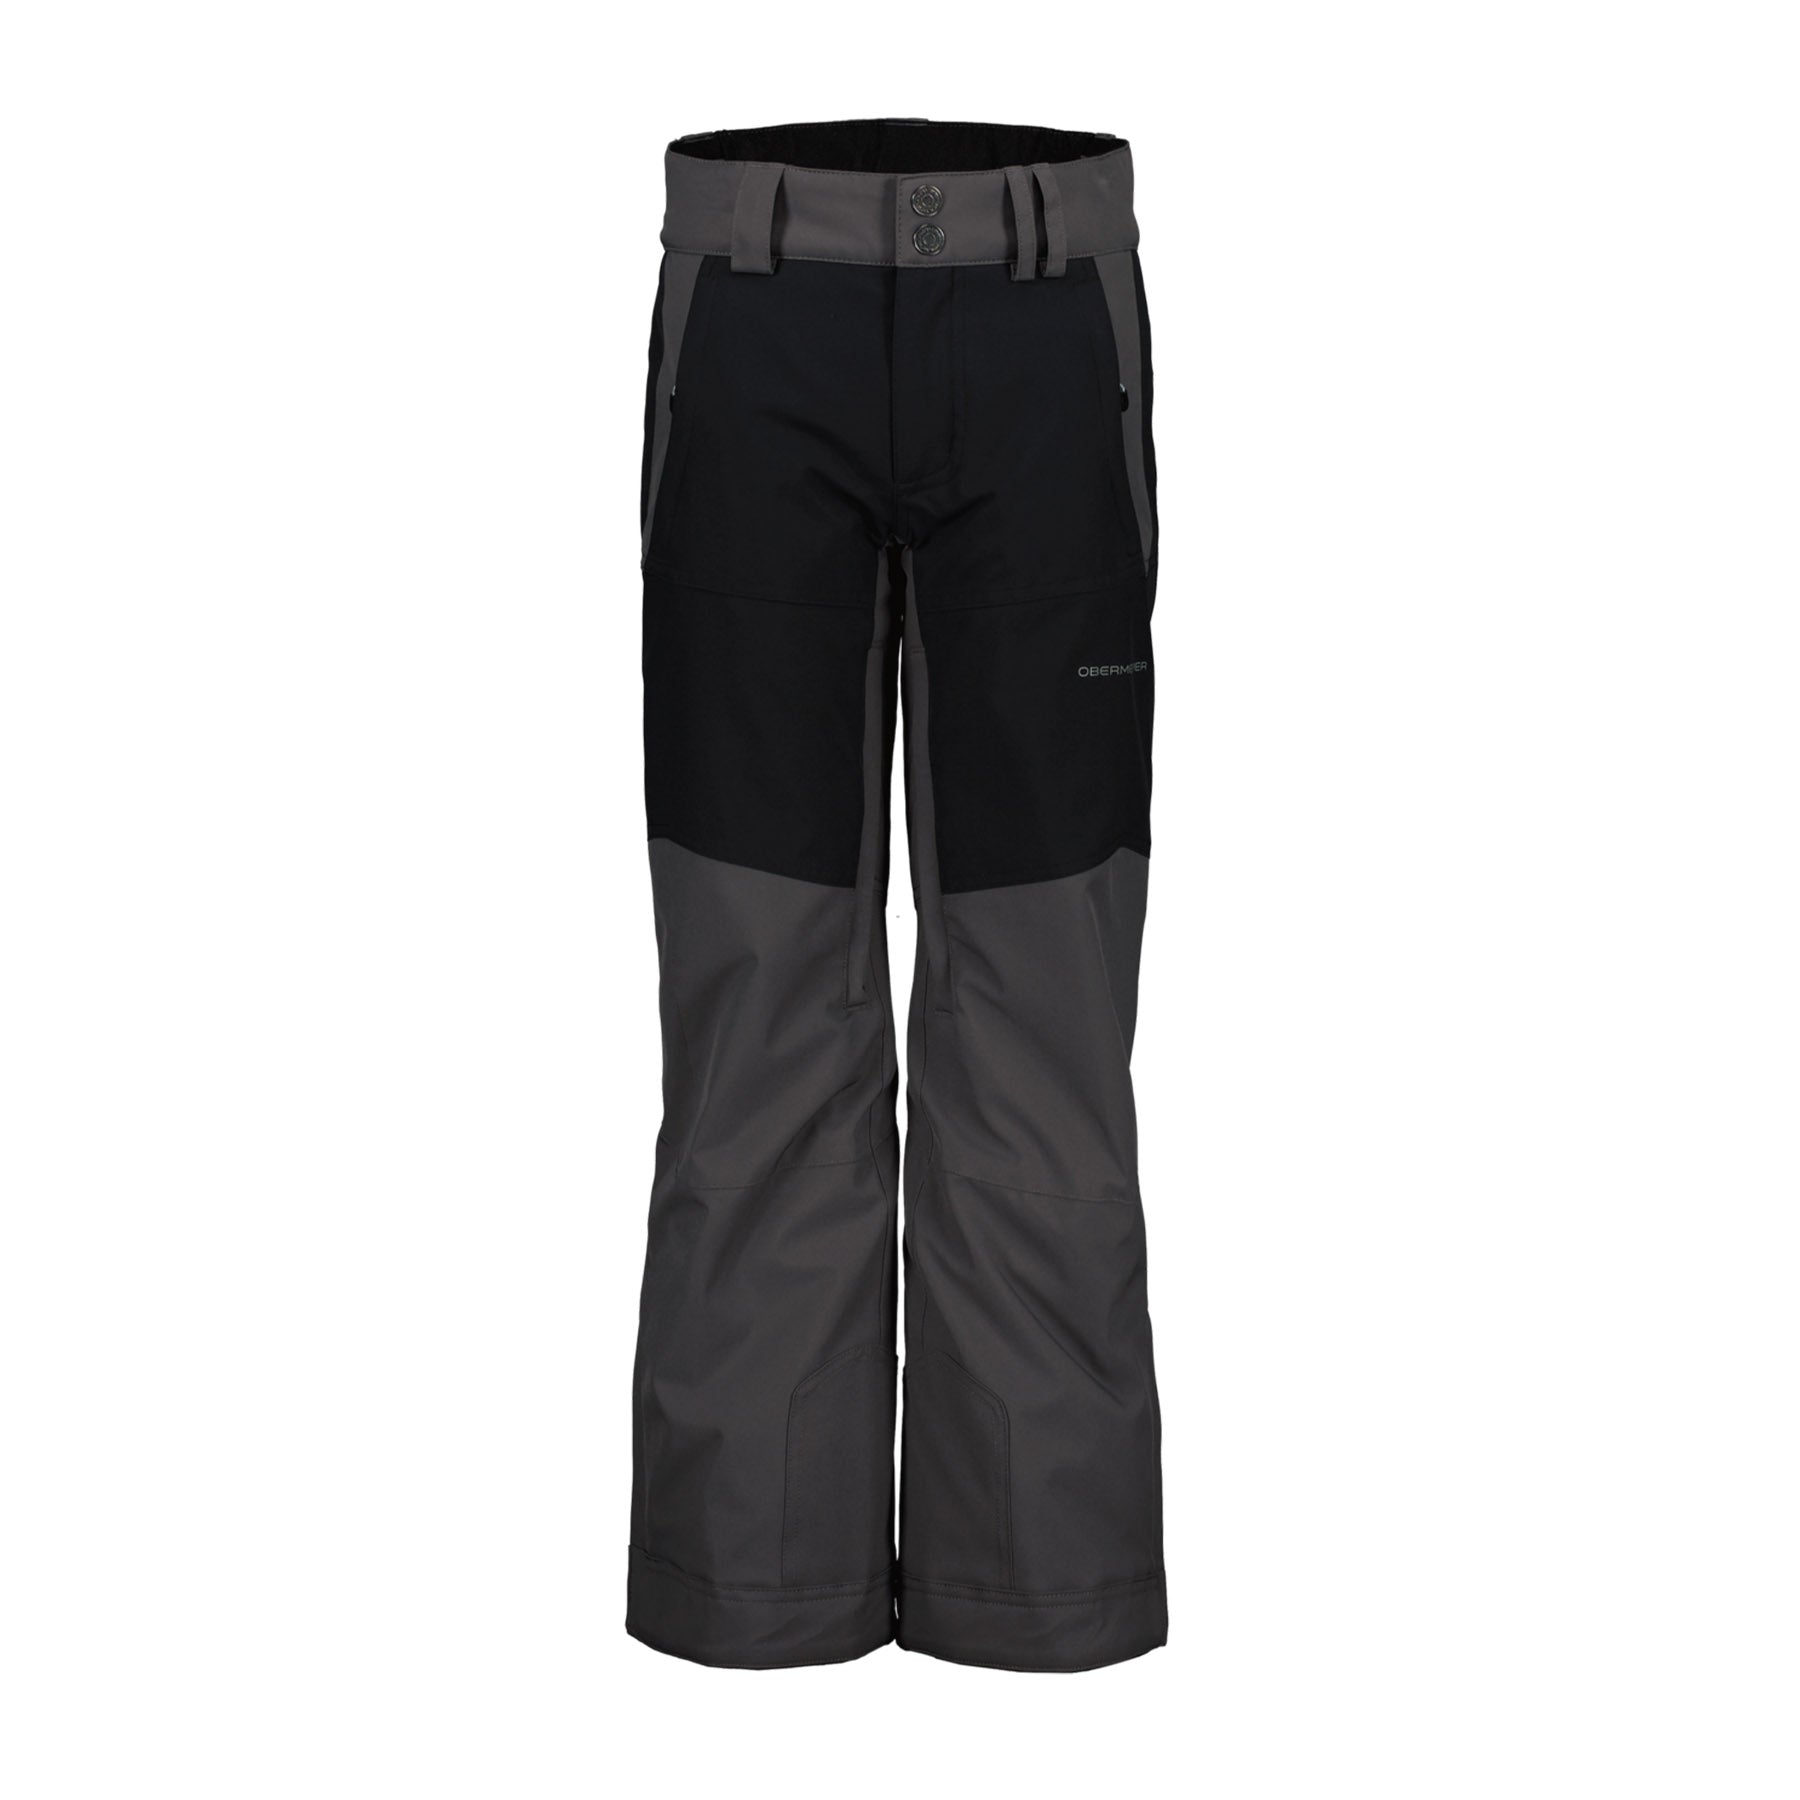 Hero image featuring the front of the Obermeyer kids Parker Pant in coal with black front panels above the knee.